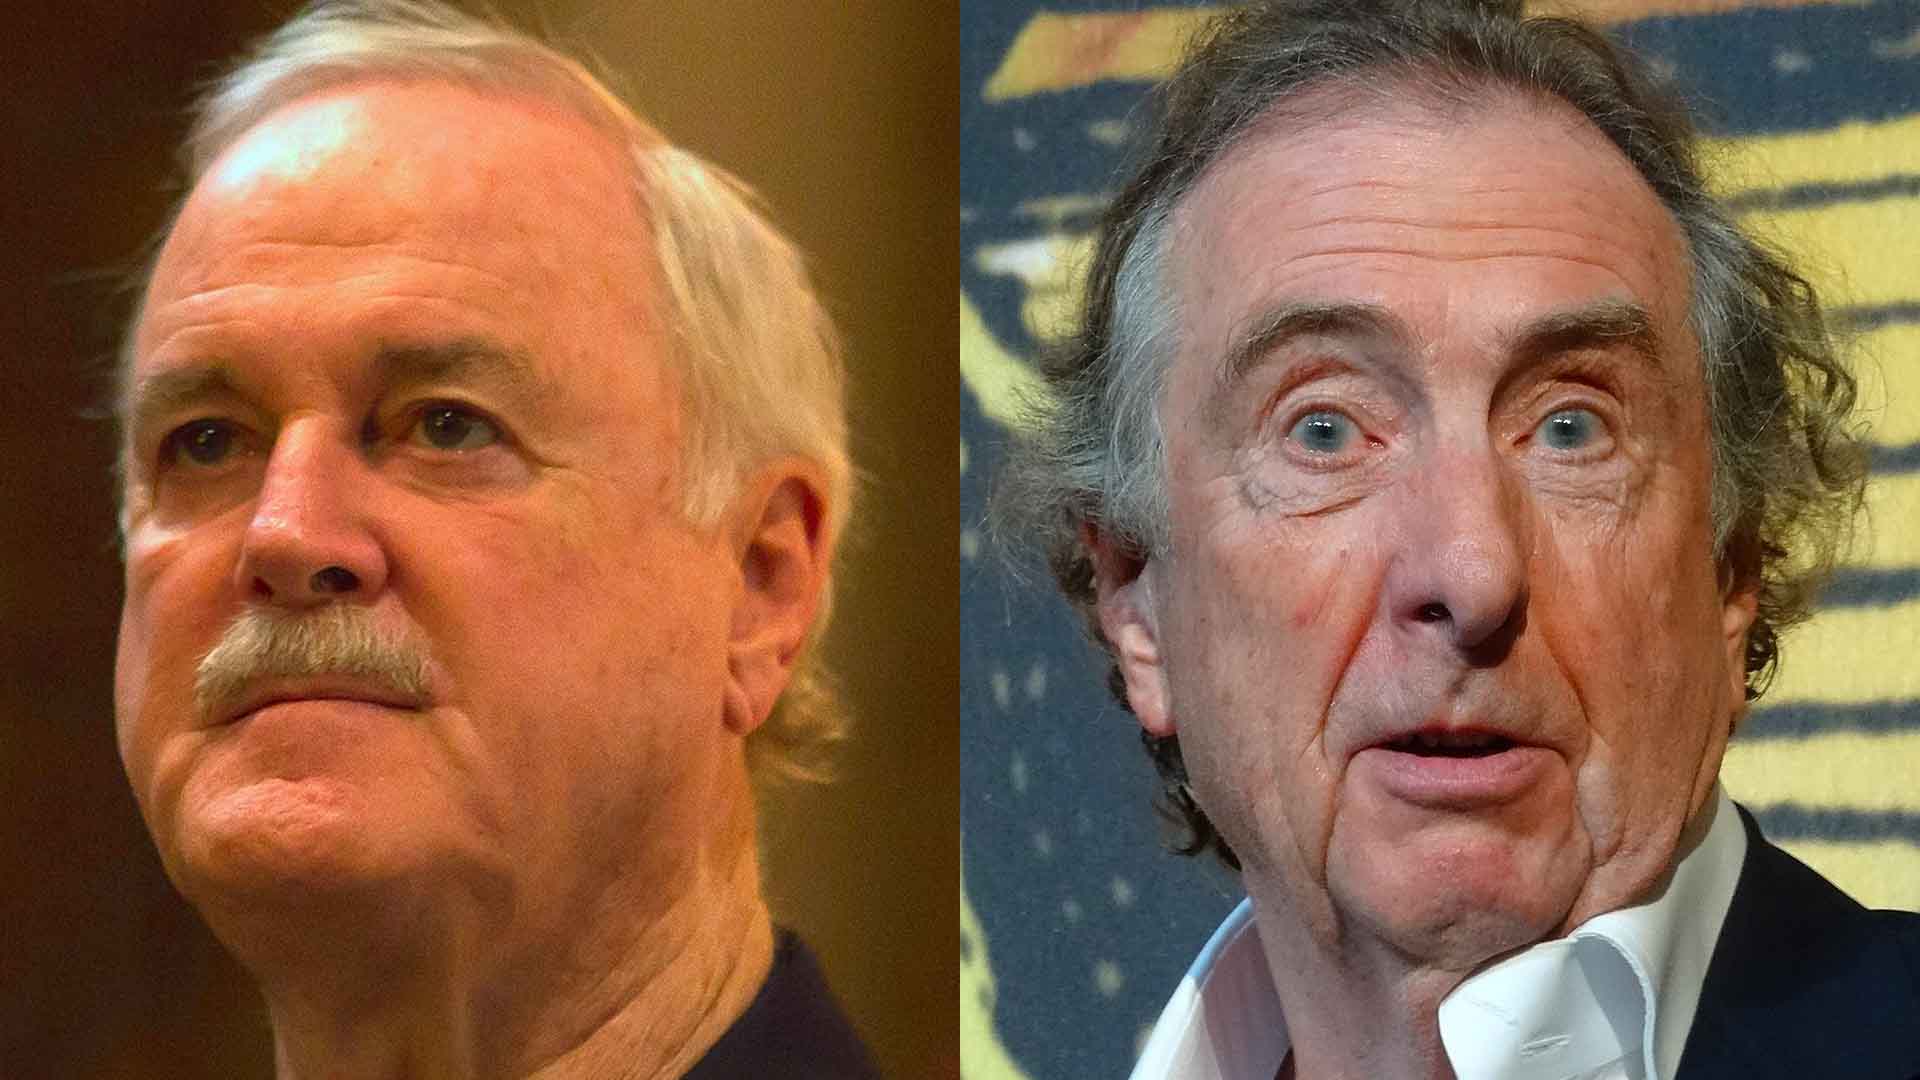 Split screen image of John Cleese and Eric Idle